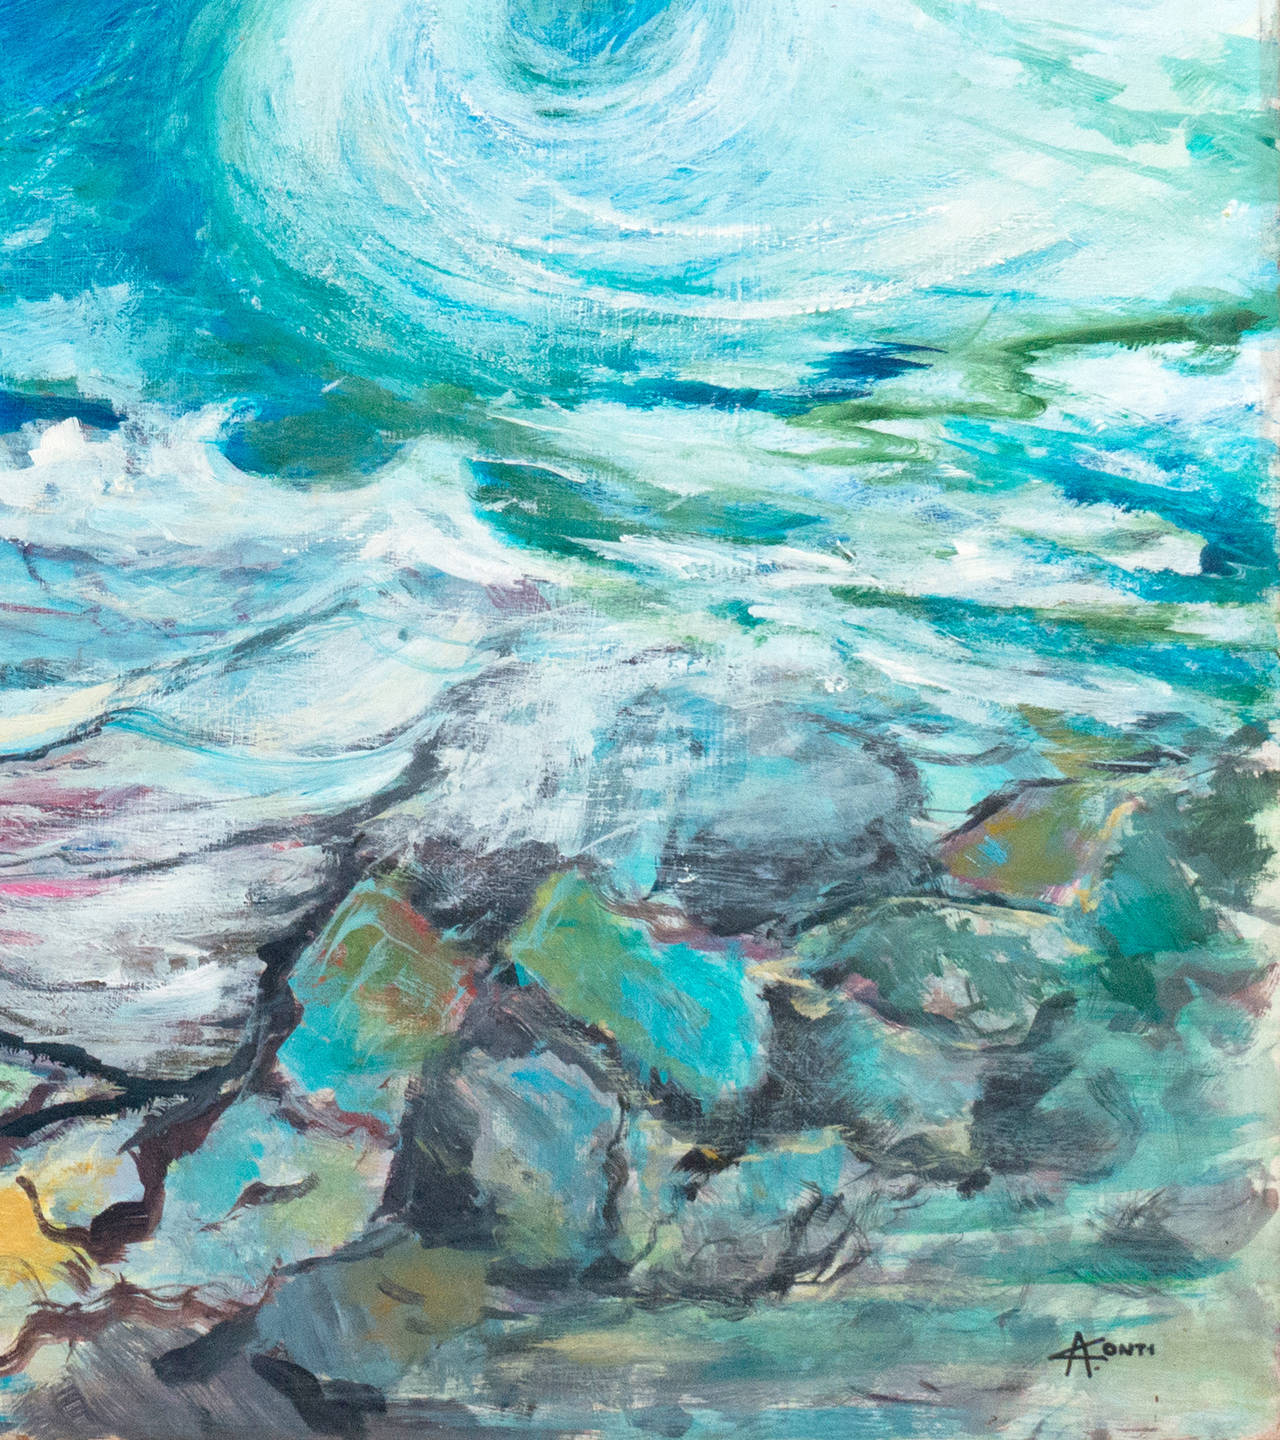 'Waves off the Coast', Monterey, California, Large Modernist Seascape - Expressionist Painting by Alberto Conti